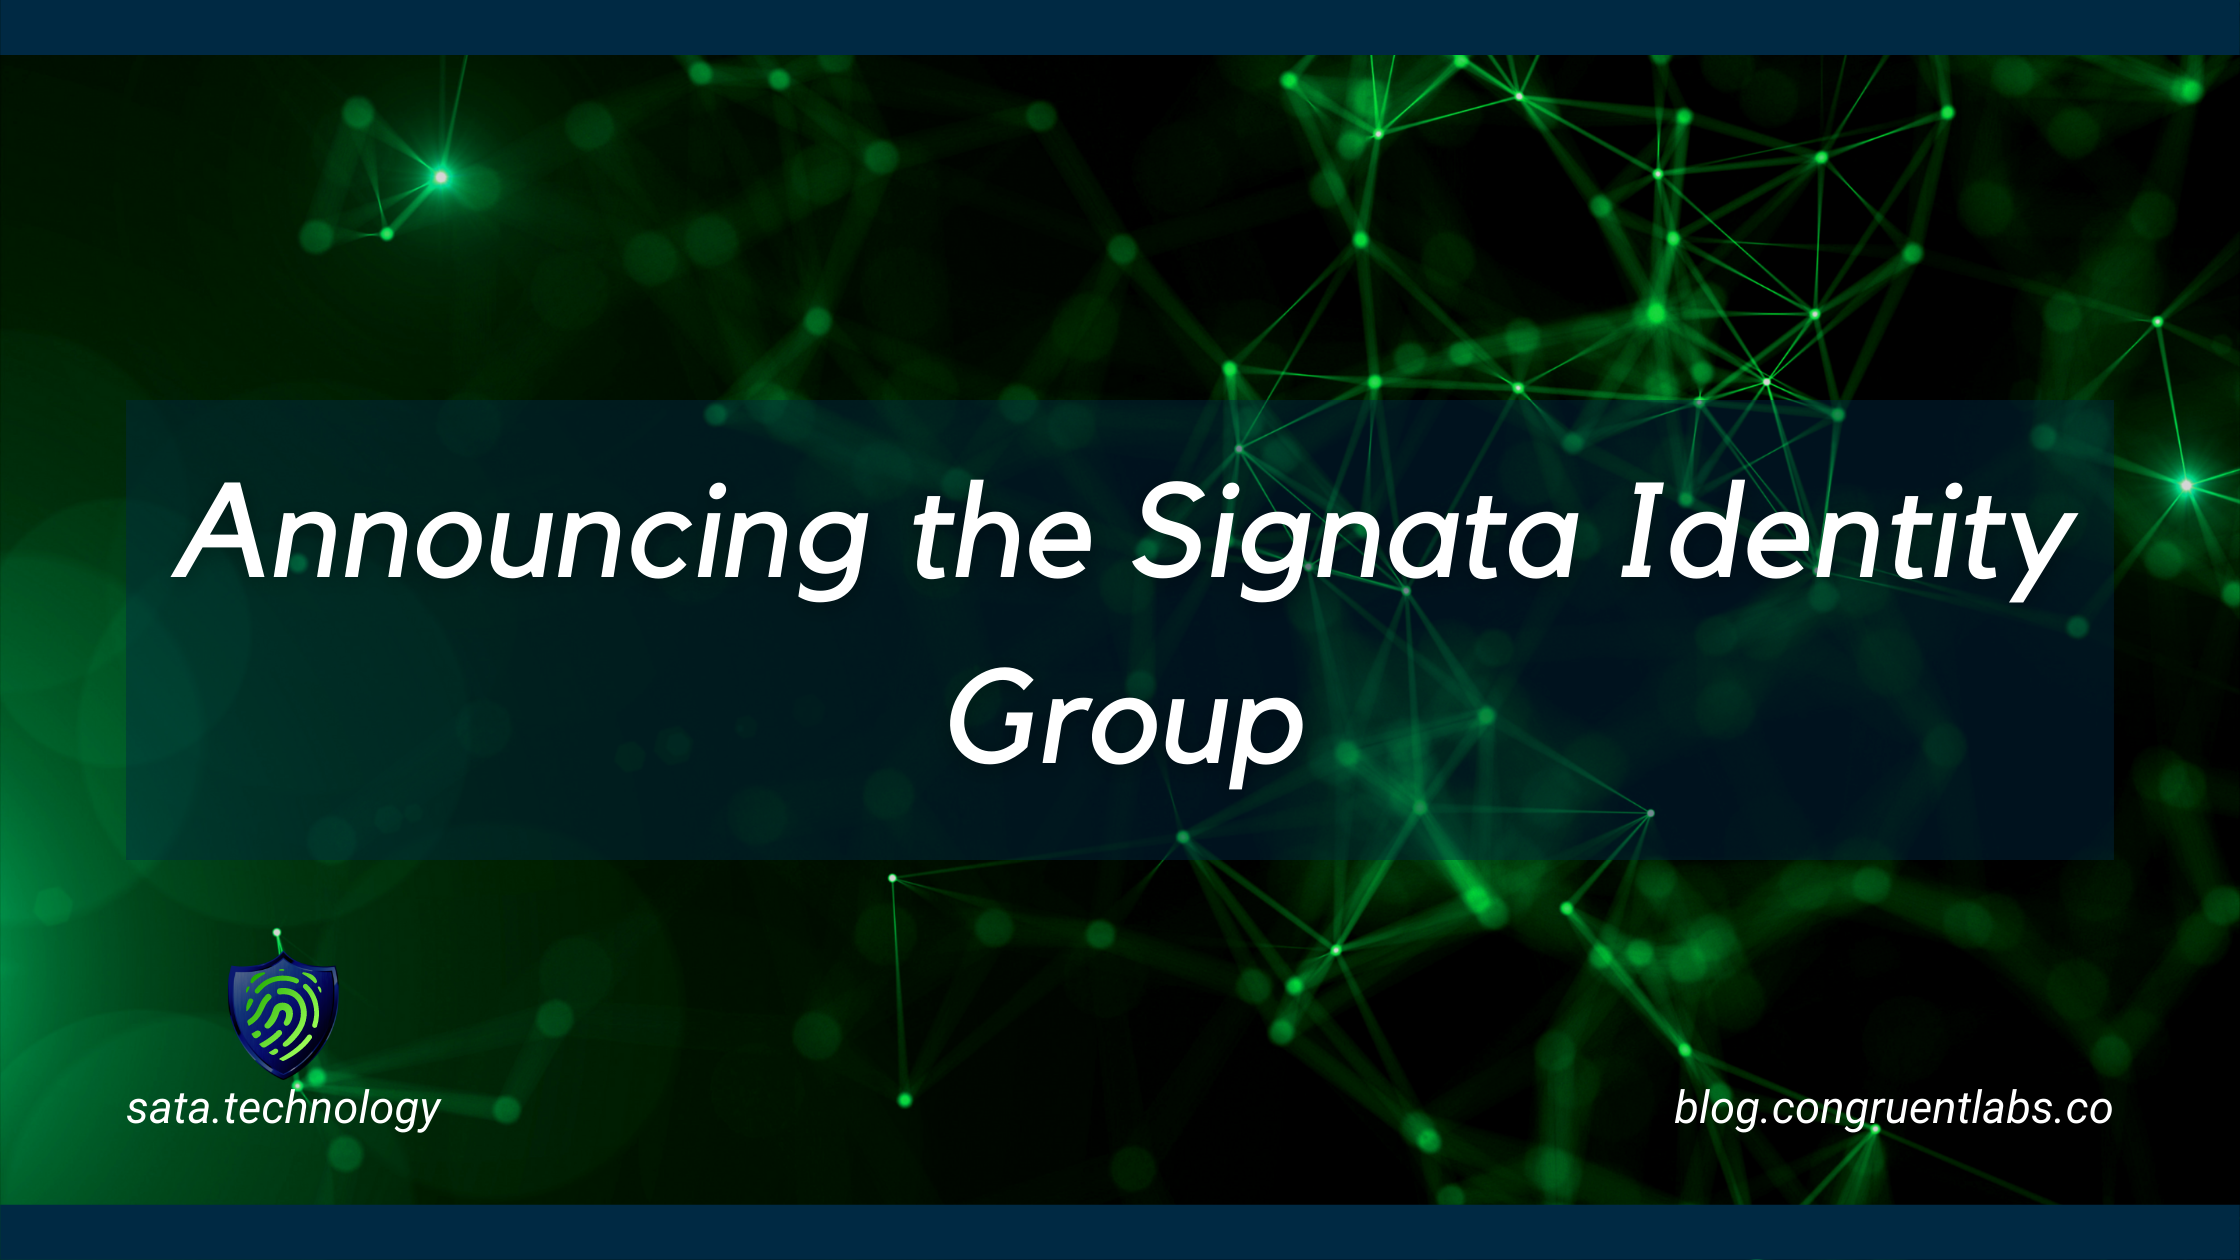 Announcing the Signata Identity Group